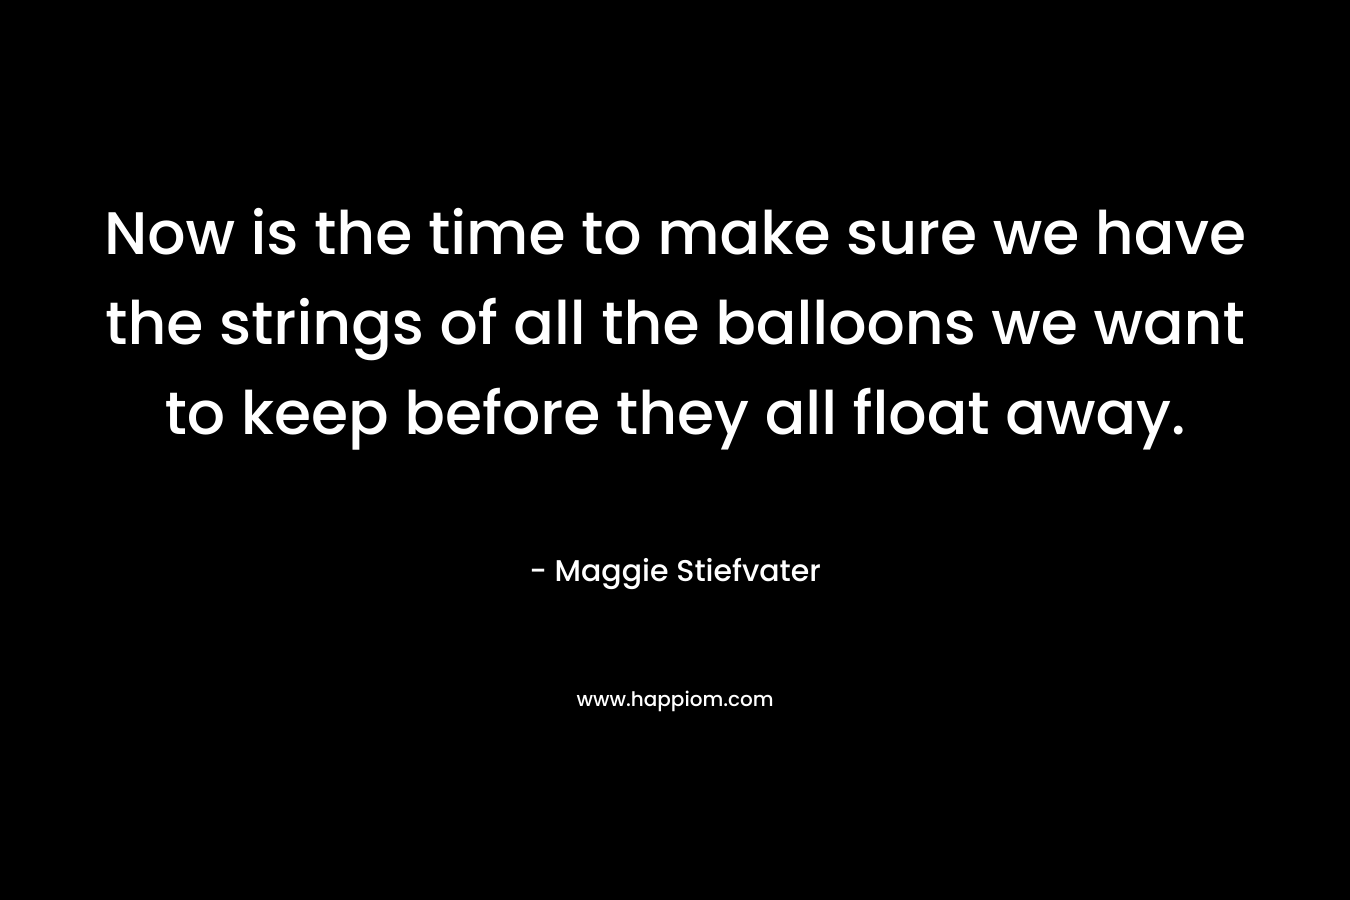 Now is the time to make sure we have the strings of all the balloons we want to keep before they all float away. – Maggie Stiefvater